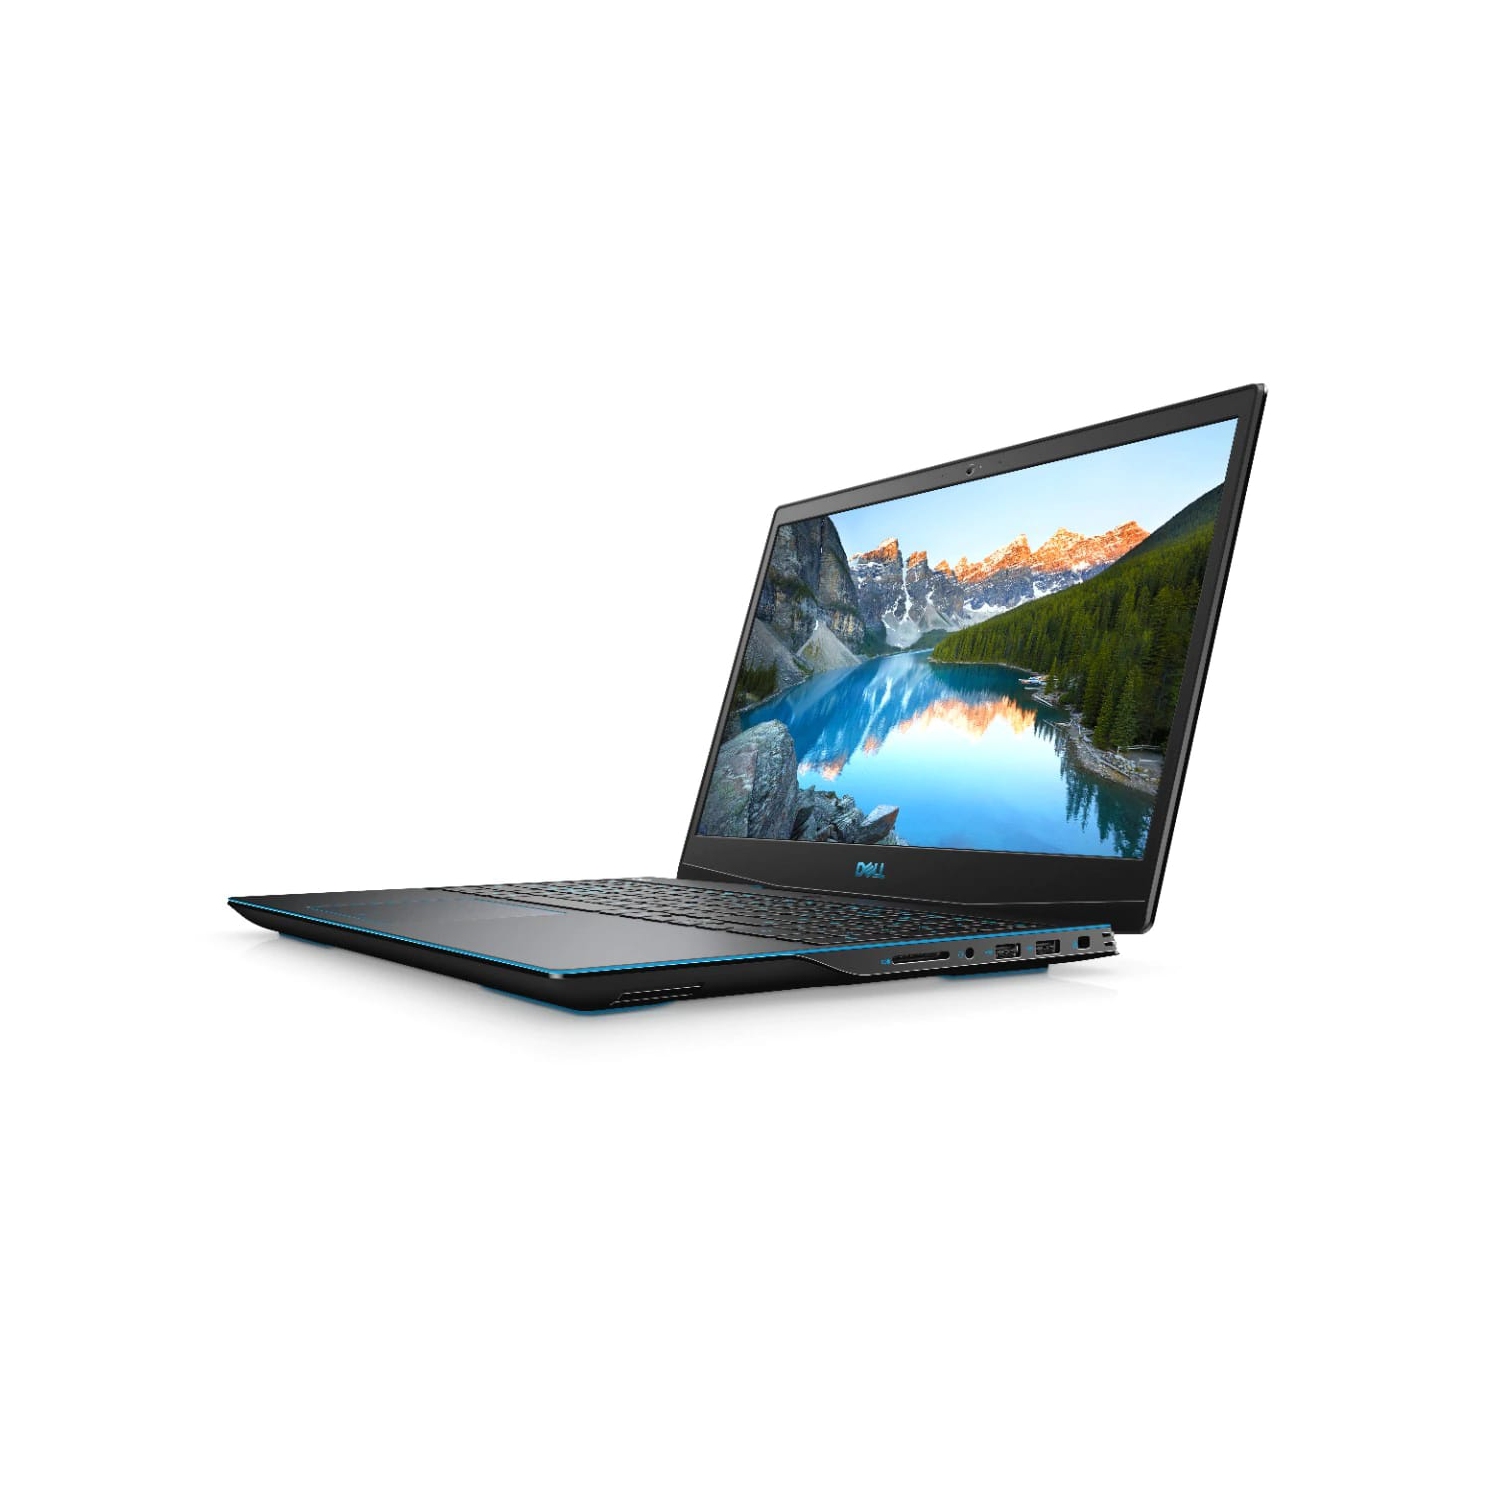 Refurbished (Excellent) – Dell G3 3500 Gaming Laptop (2020) | 15.6" FHD | Core i5 - 512GB SSD - 8GB RAM - GTX 1650 | 4 Cores @ 4.5 GHz - 10th Gen CPU